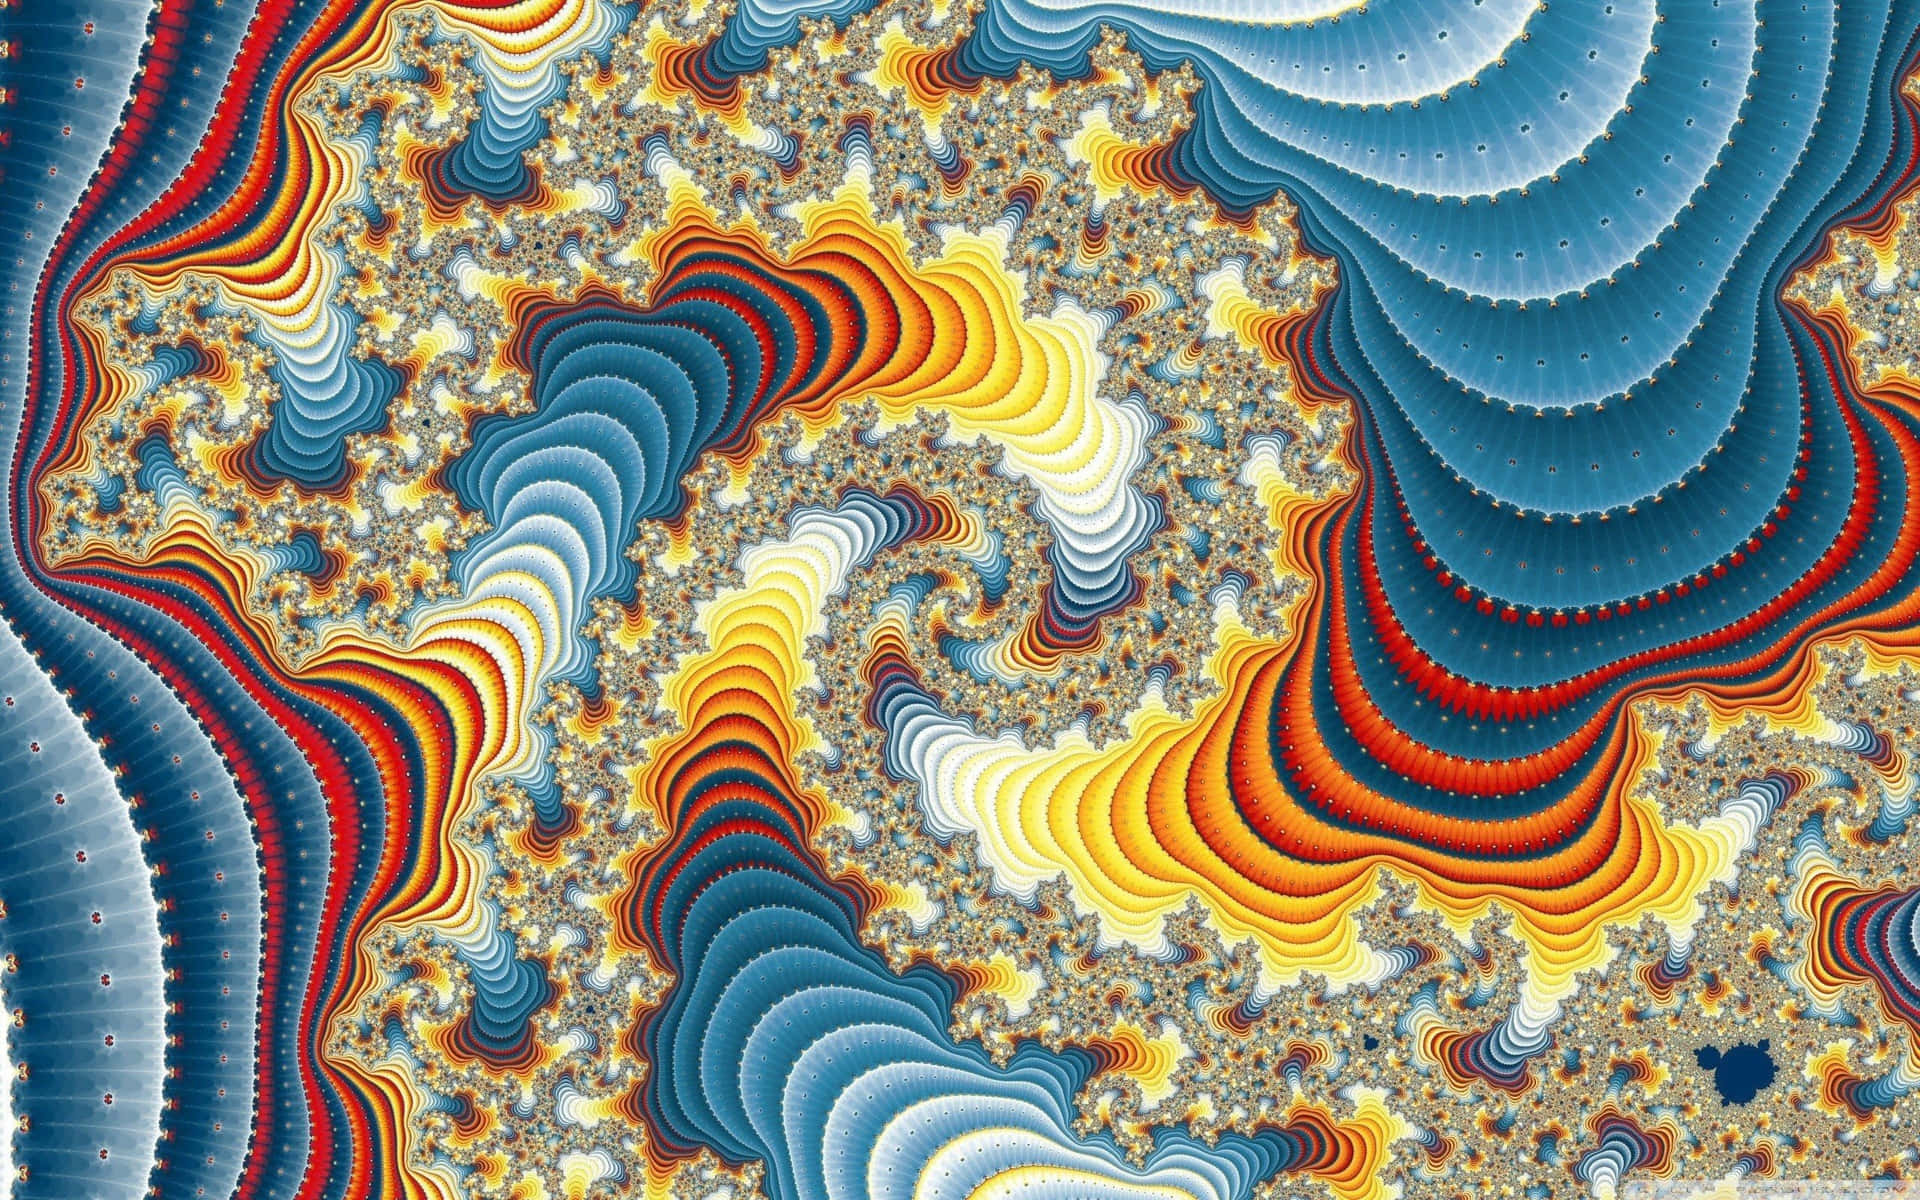 A Colorful Fractal Pattern With A Spiral Design Wallpaper